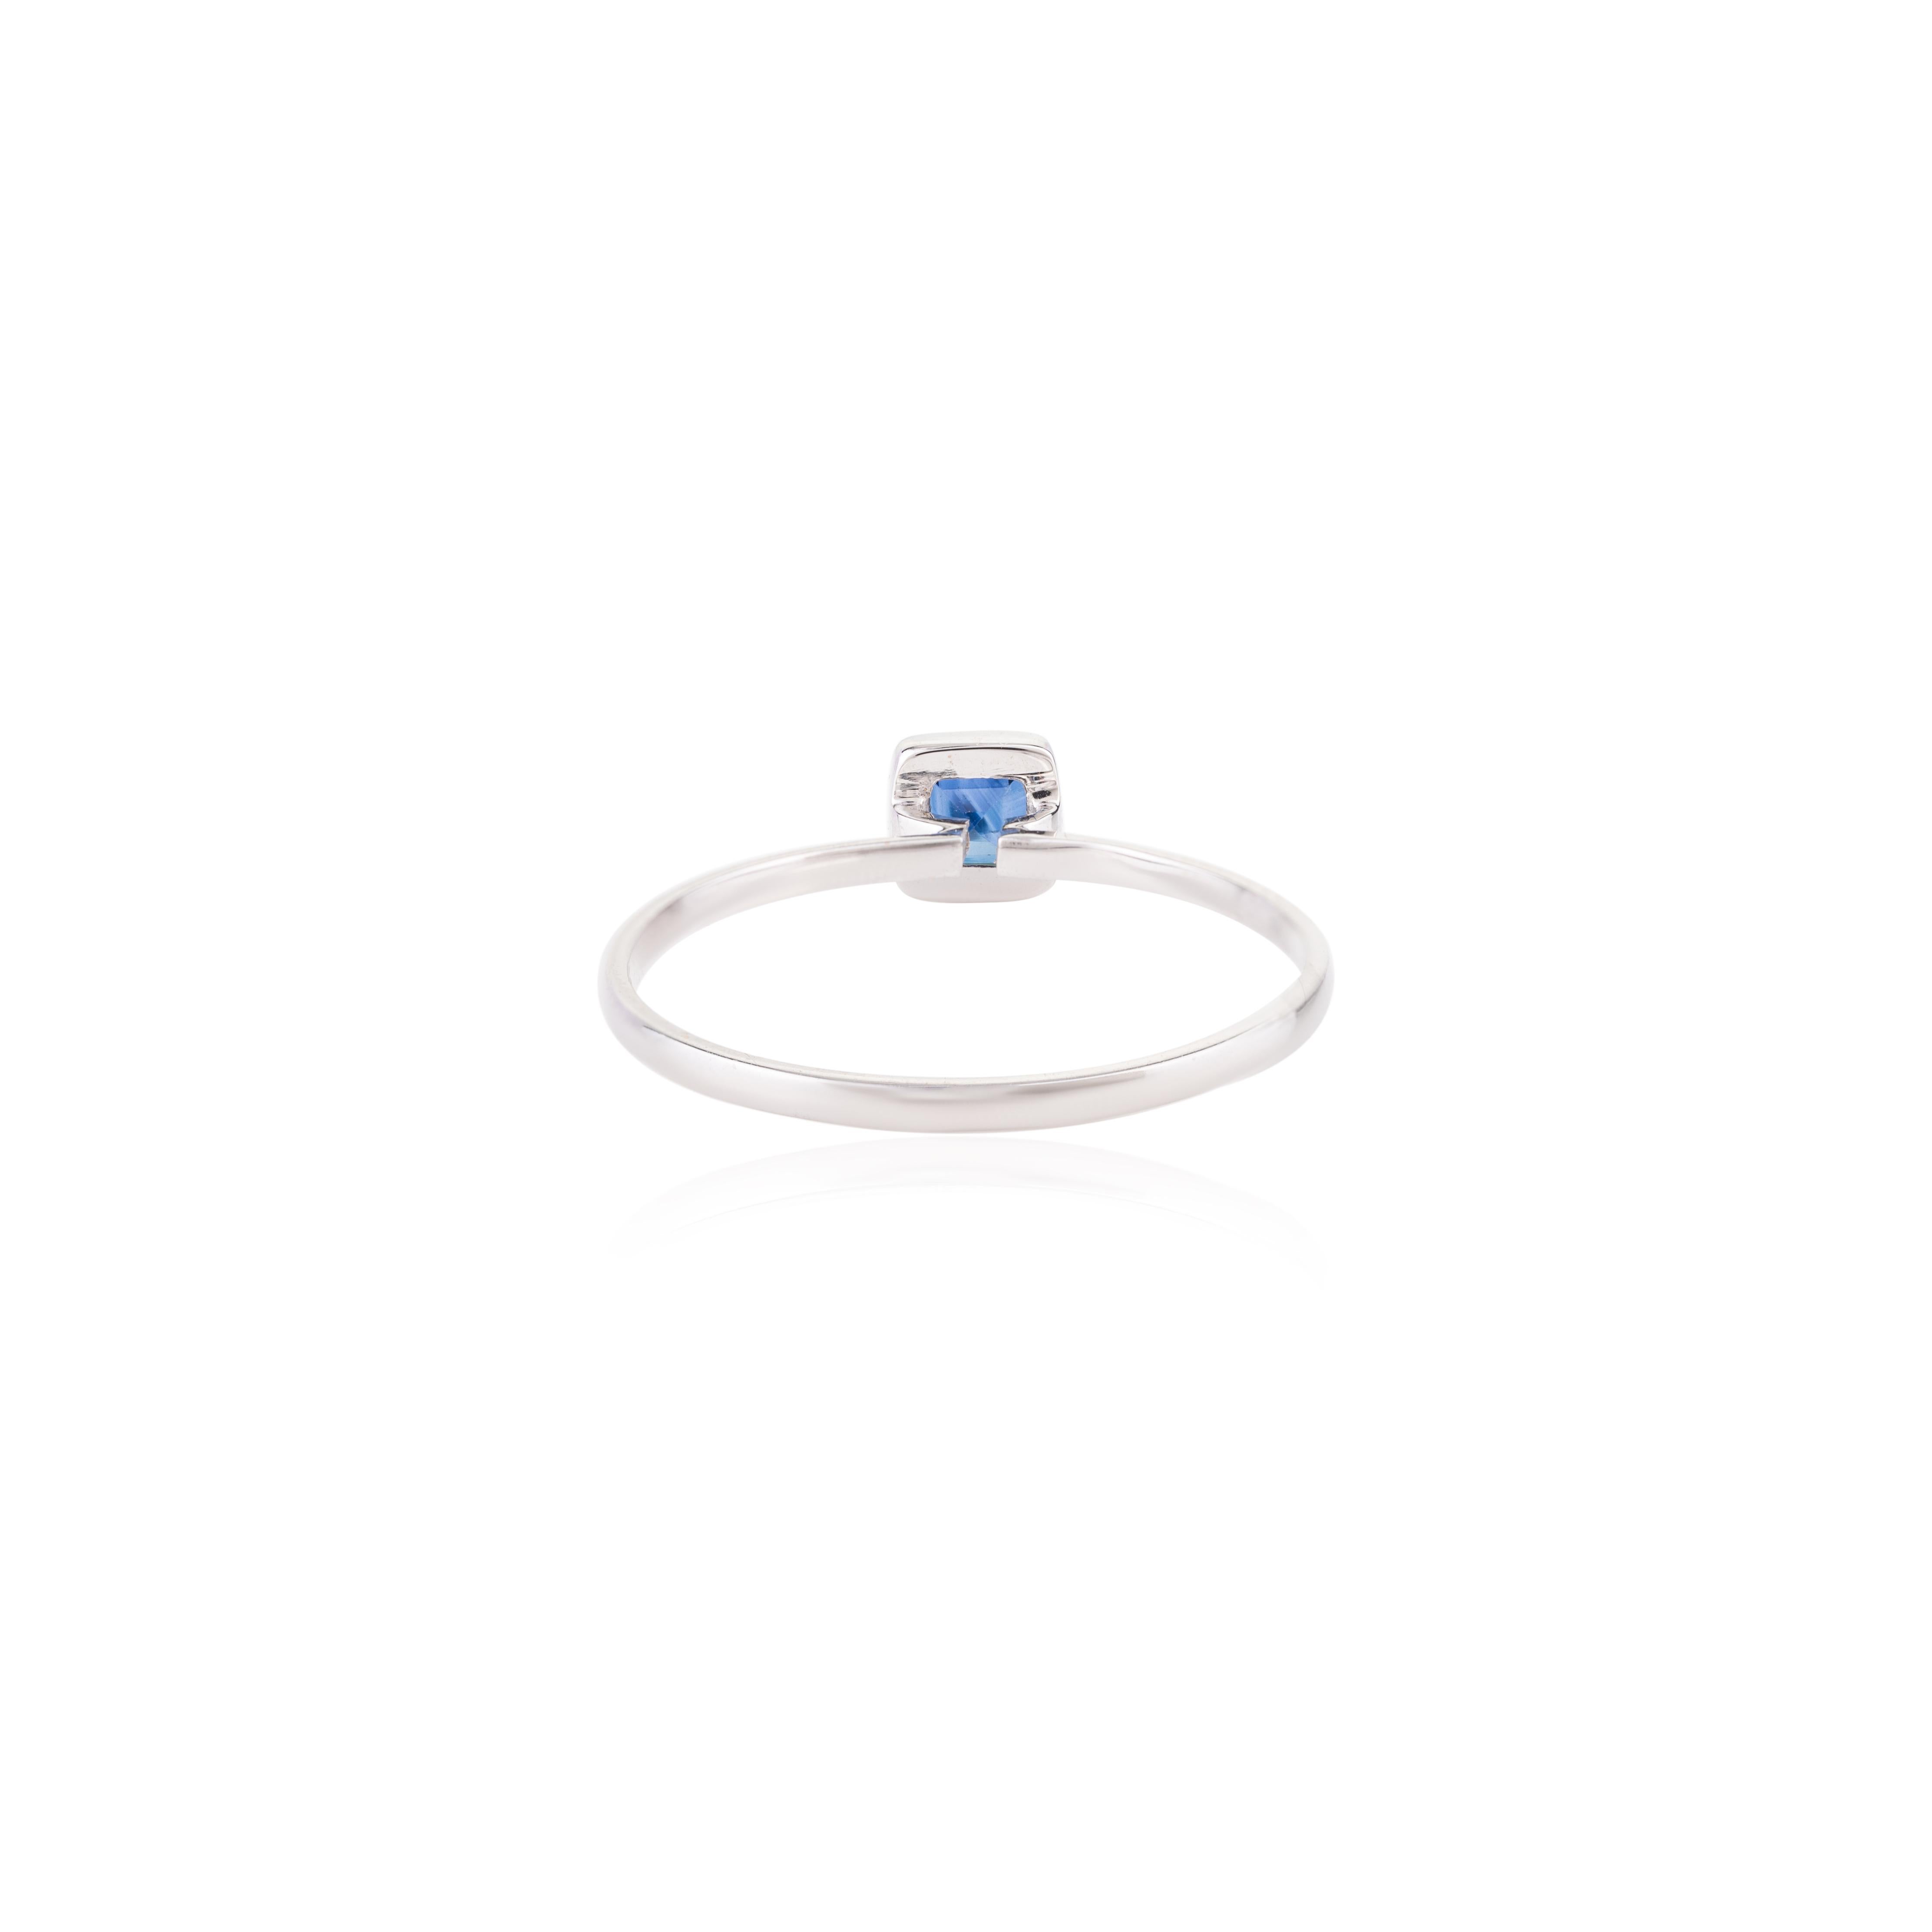 For Sale:  Real Certified Blue Sapphire Square Ring in 18k Solid White Gold Settings 6